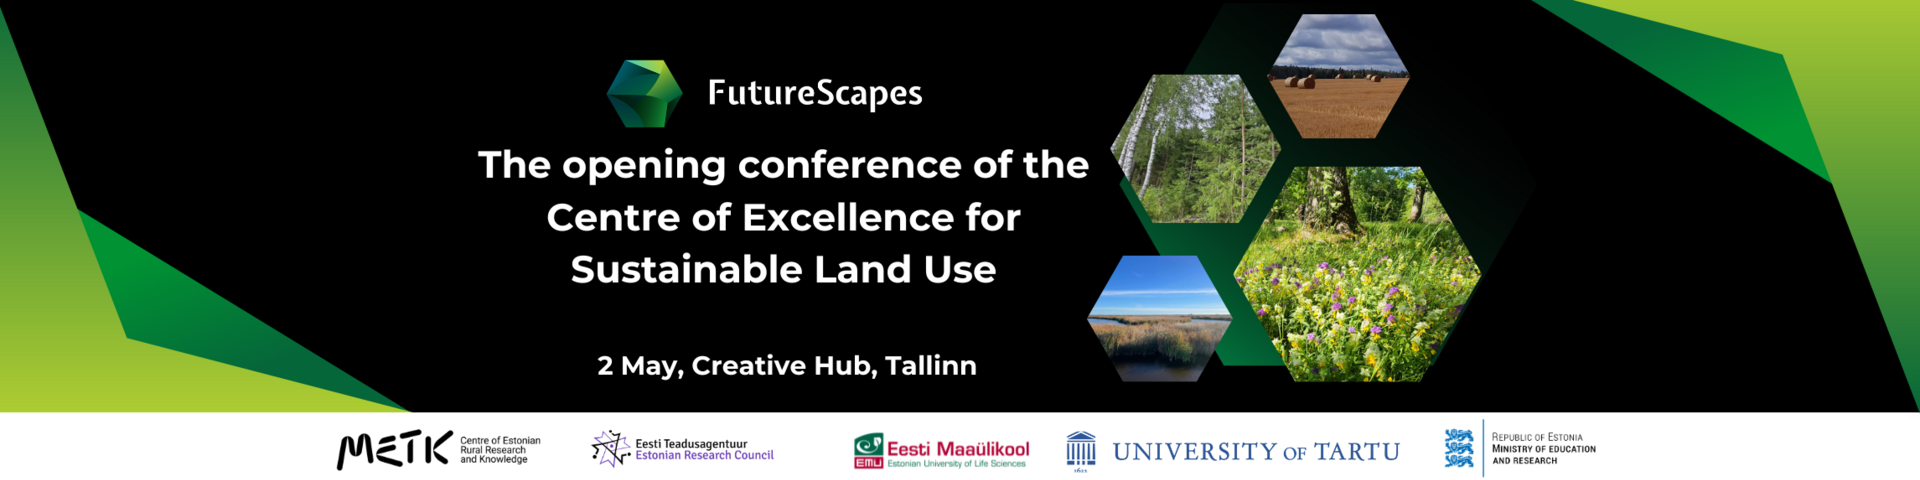 Opening conference of the Centre of Excellence for Sustainable Land Use